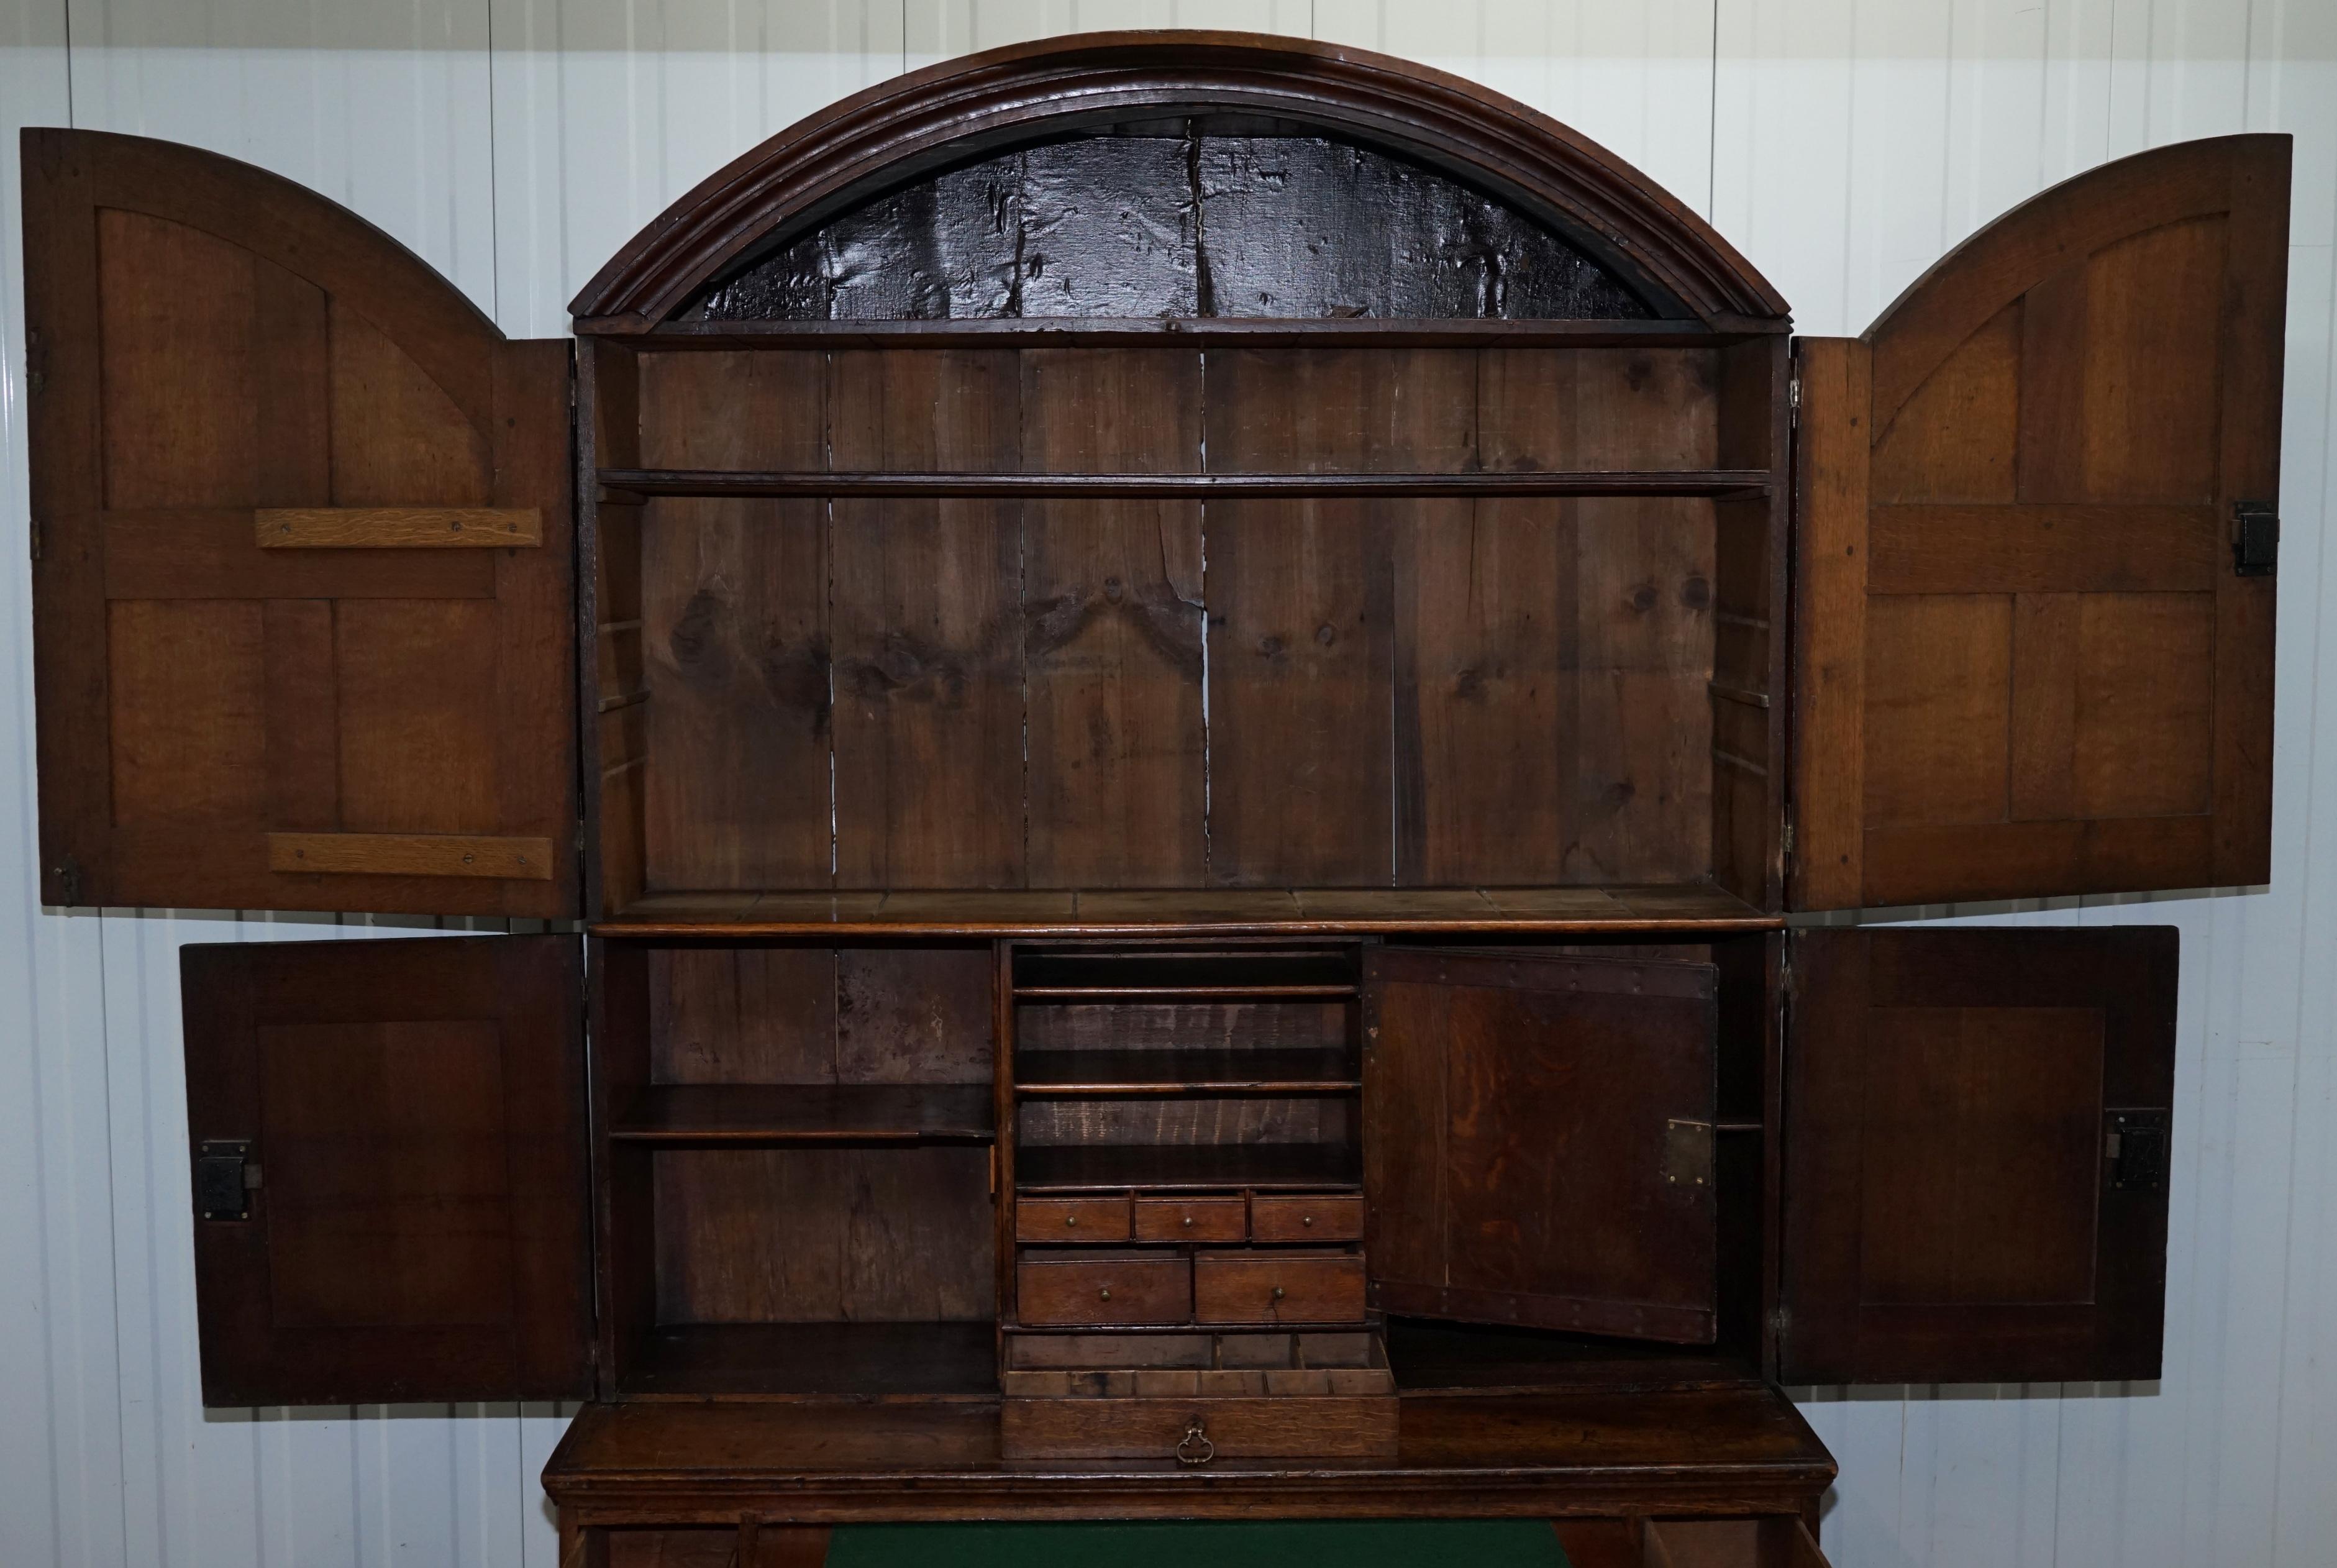 English Very Rare circa 1740 Continental Arched Top Oak Dresser Cupboard Cabinet Drawers For Sale